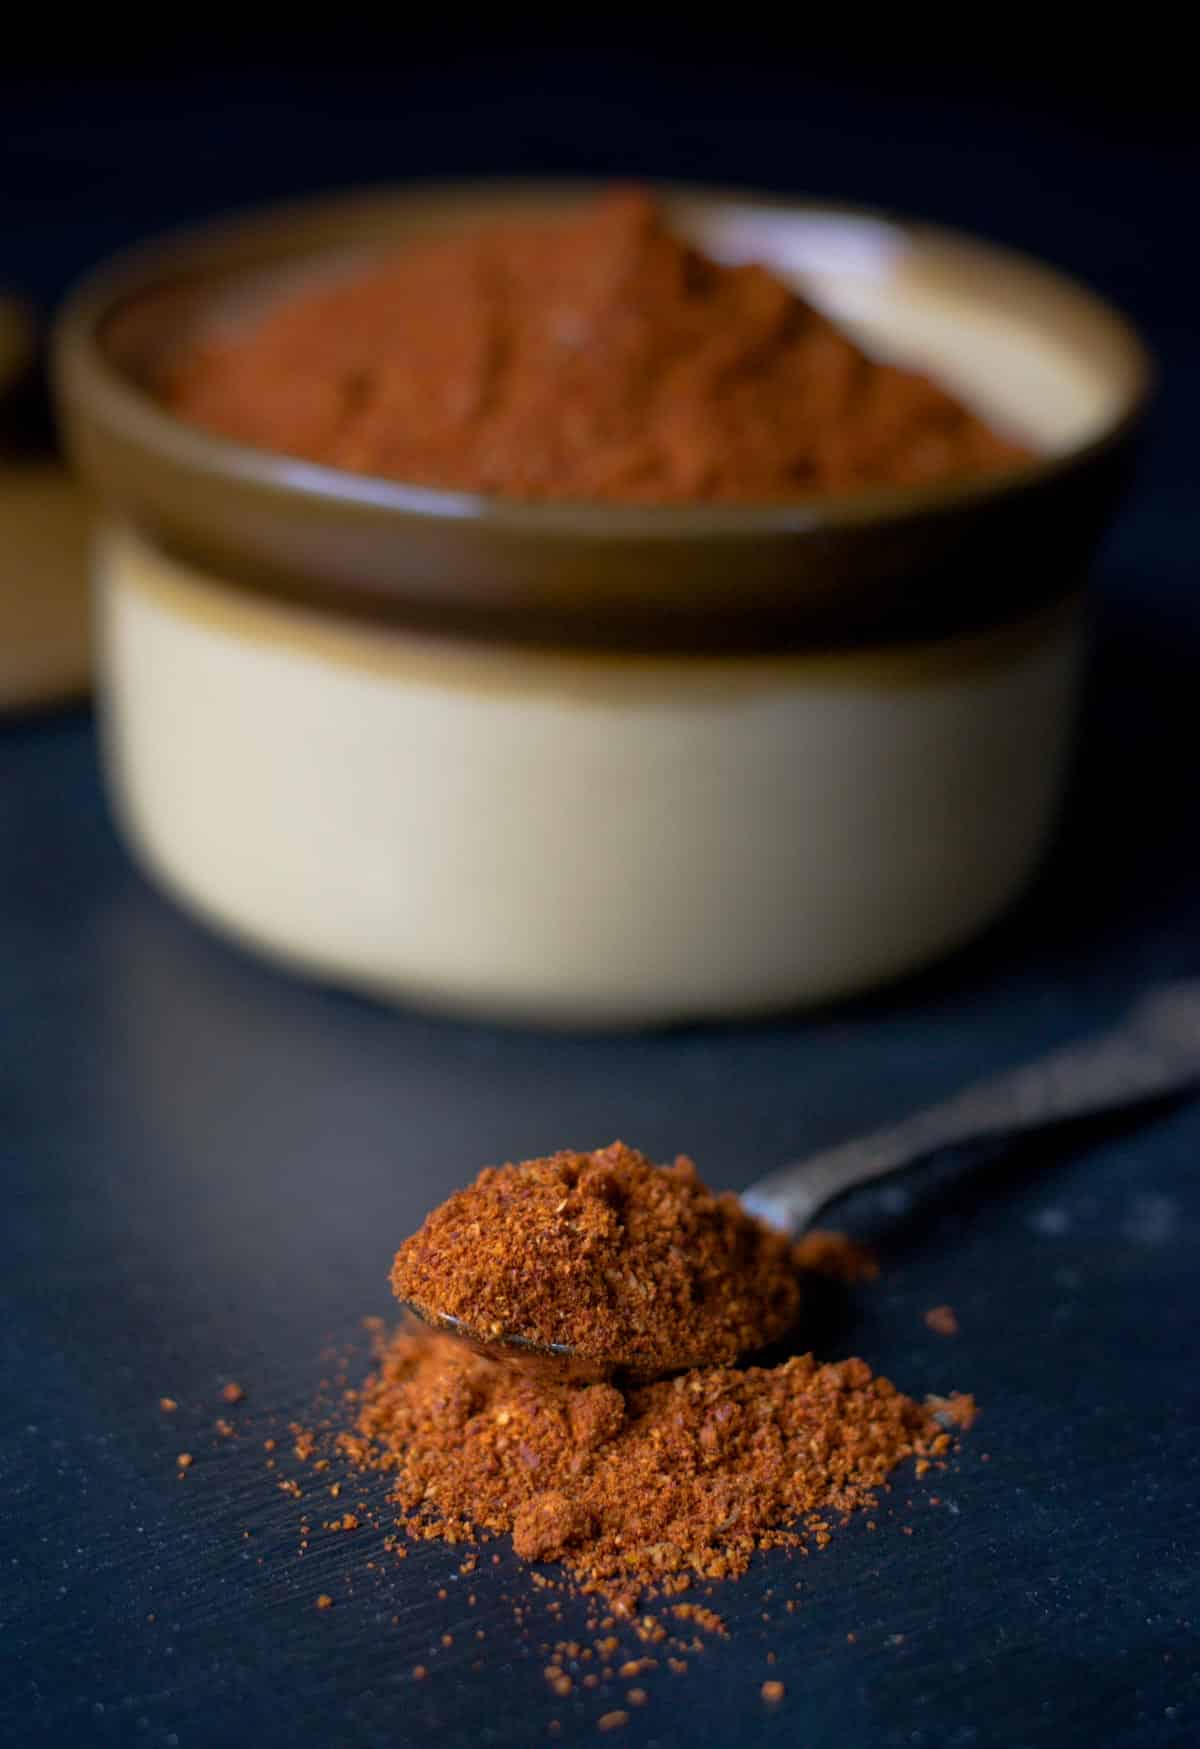 Cut your cooking time for Mangalorean dishes substantially by making this easy Bunts Style Kundapur Masala Powder ahead of time. This spice mix is what most Mangaloreans use for their vegetarian as well as non-vegetarian dishes.